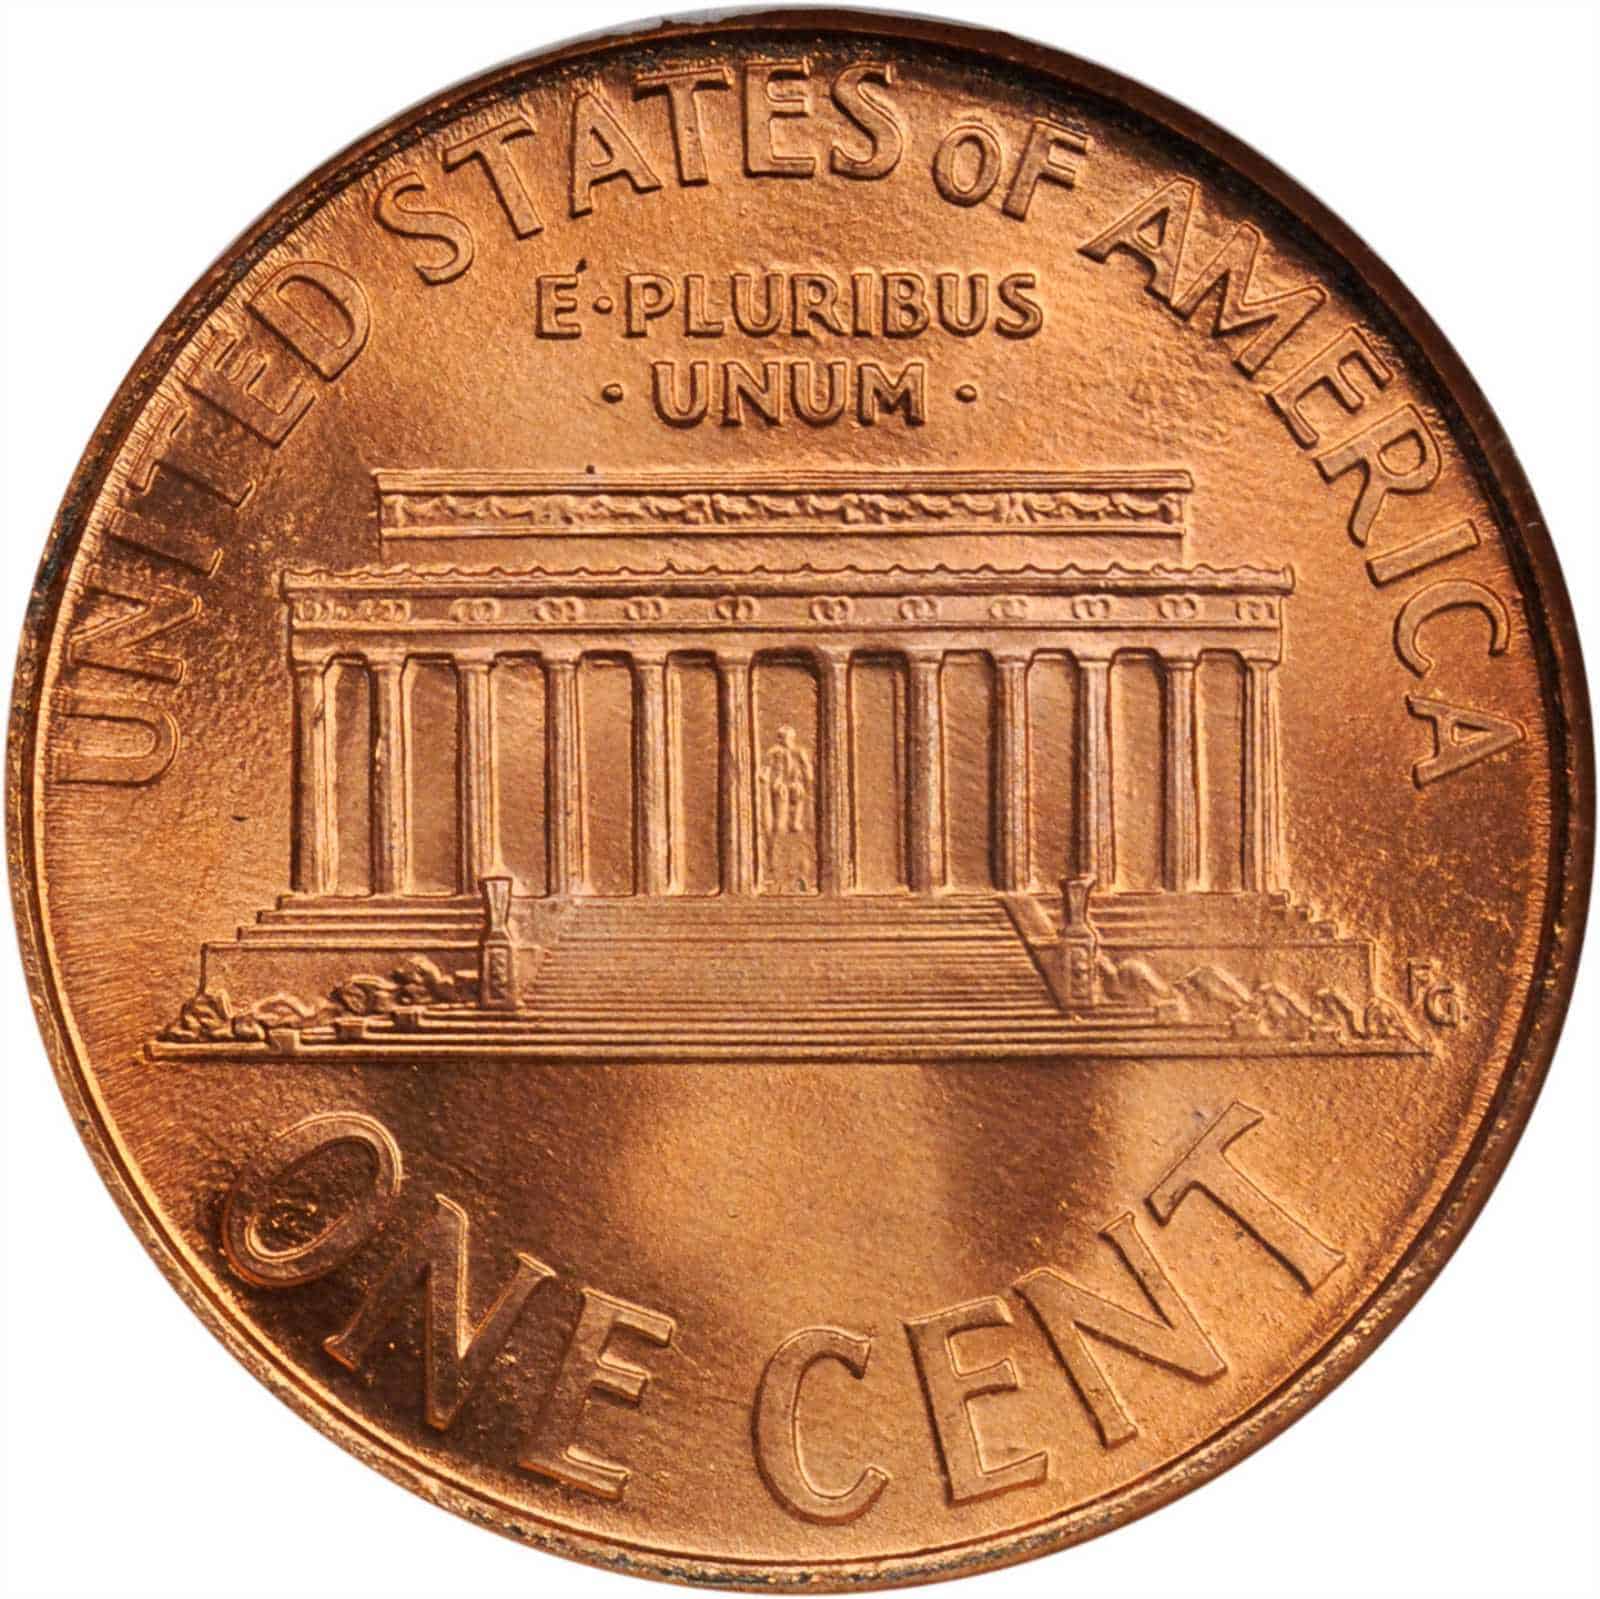 The Reverse of the 1995 Penny